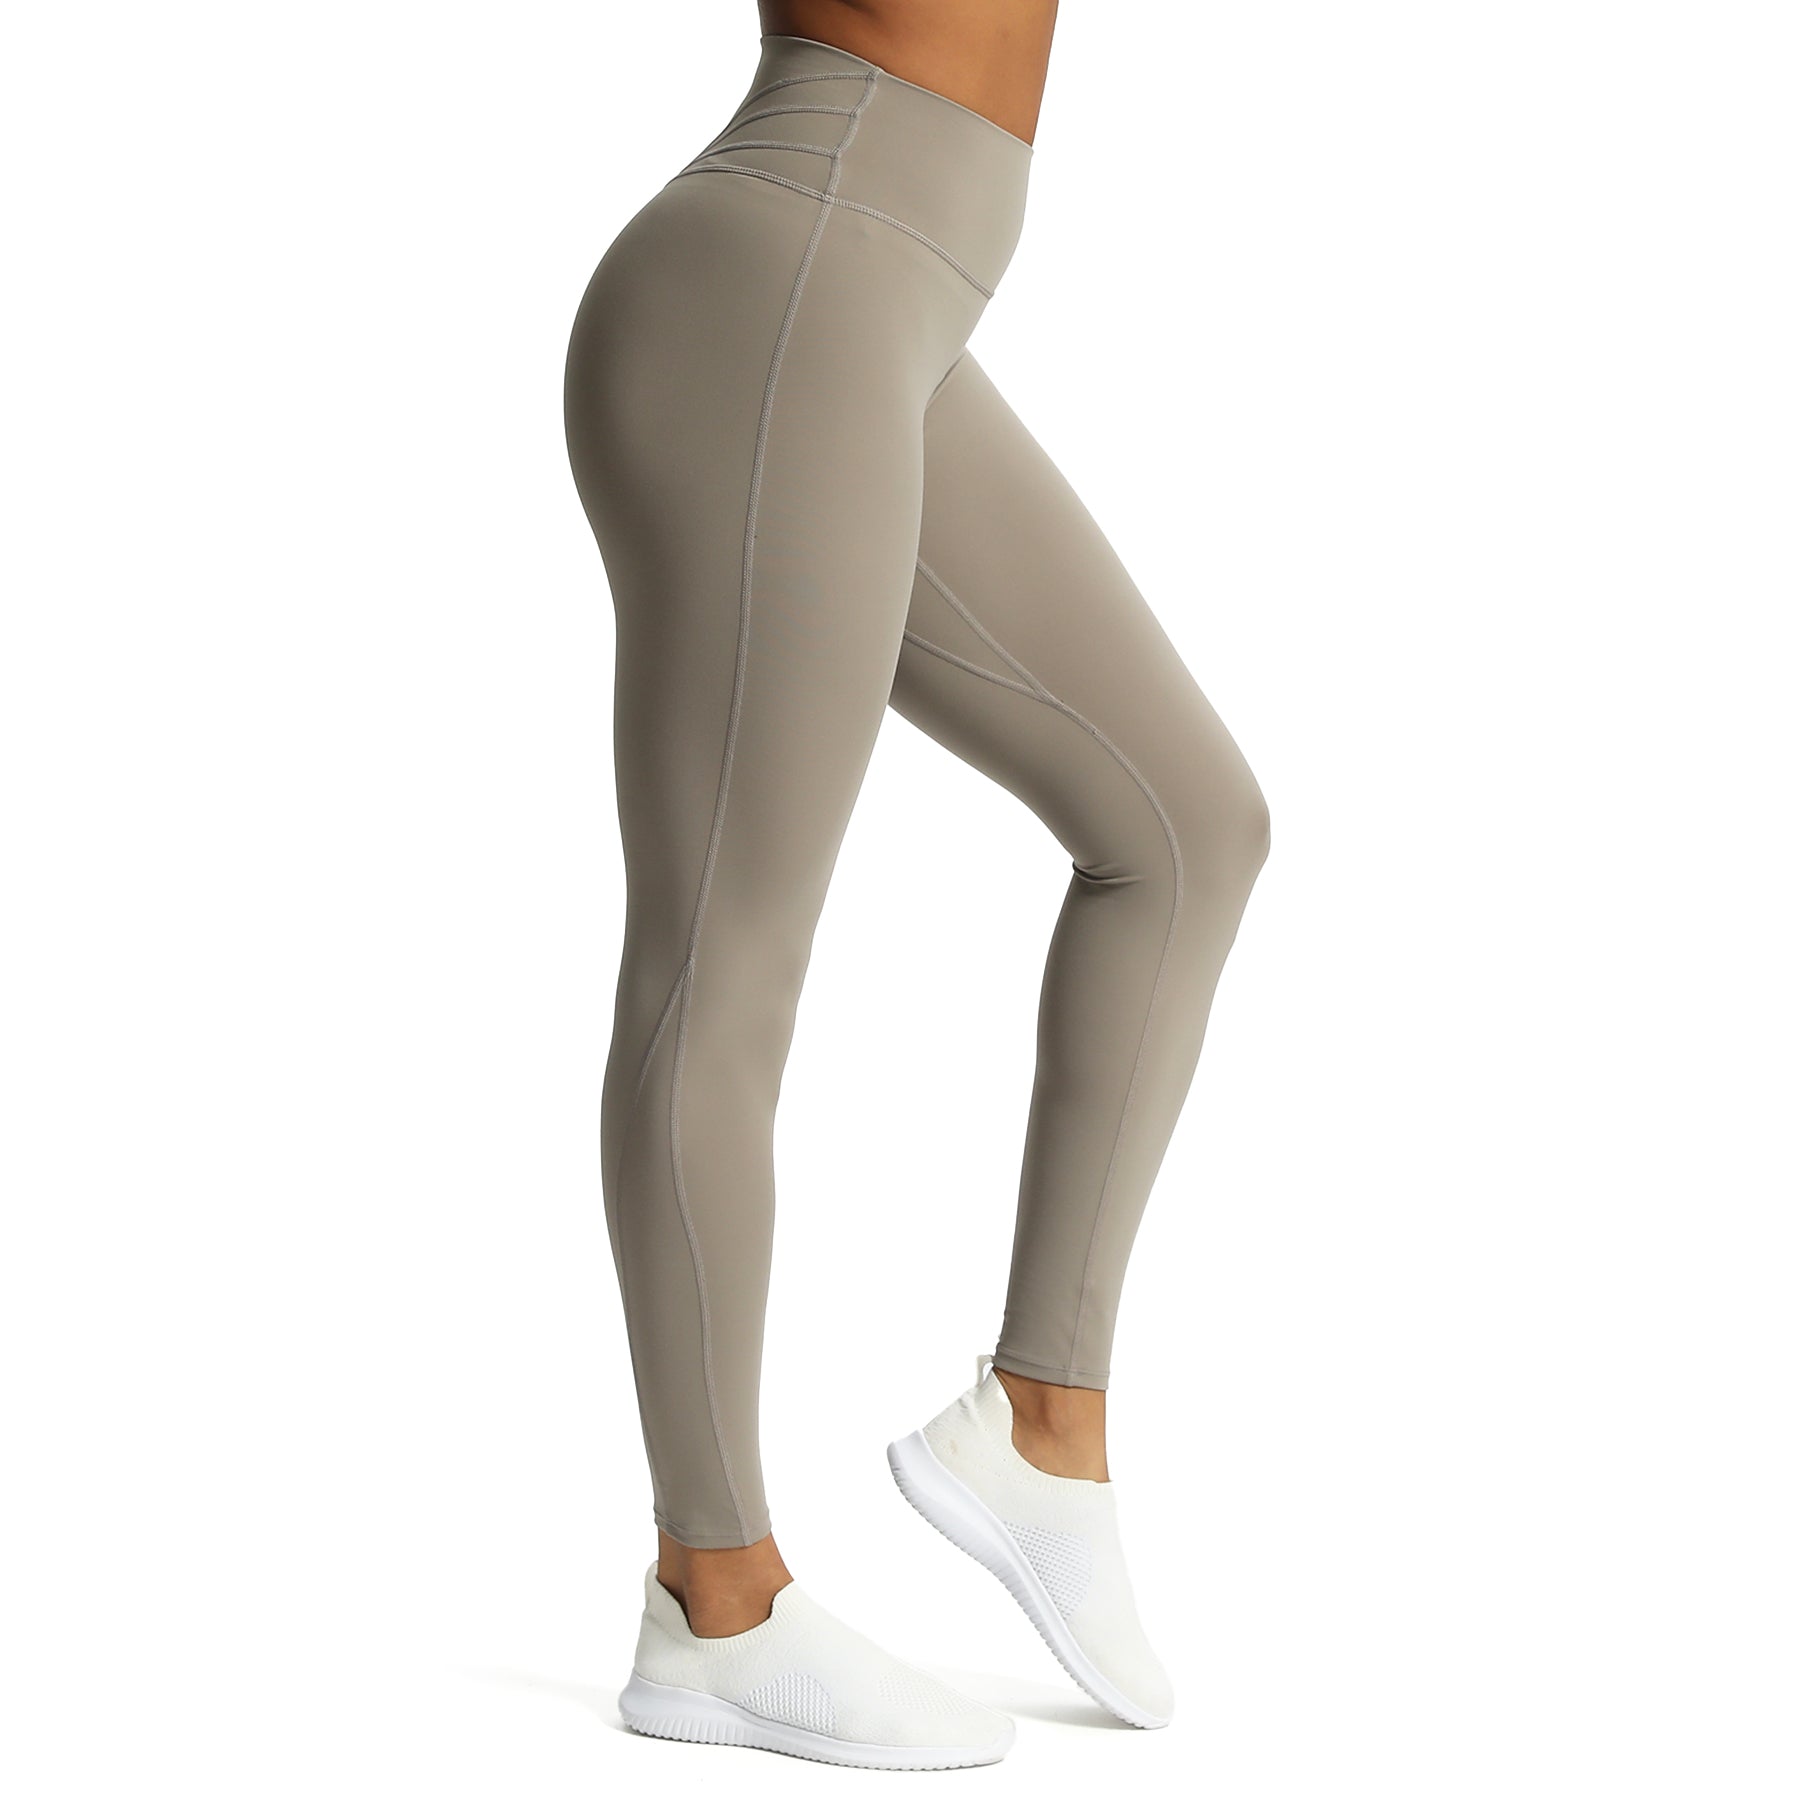 Aoxjox High Waisted Workout Leggings for Women Palestine